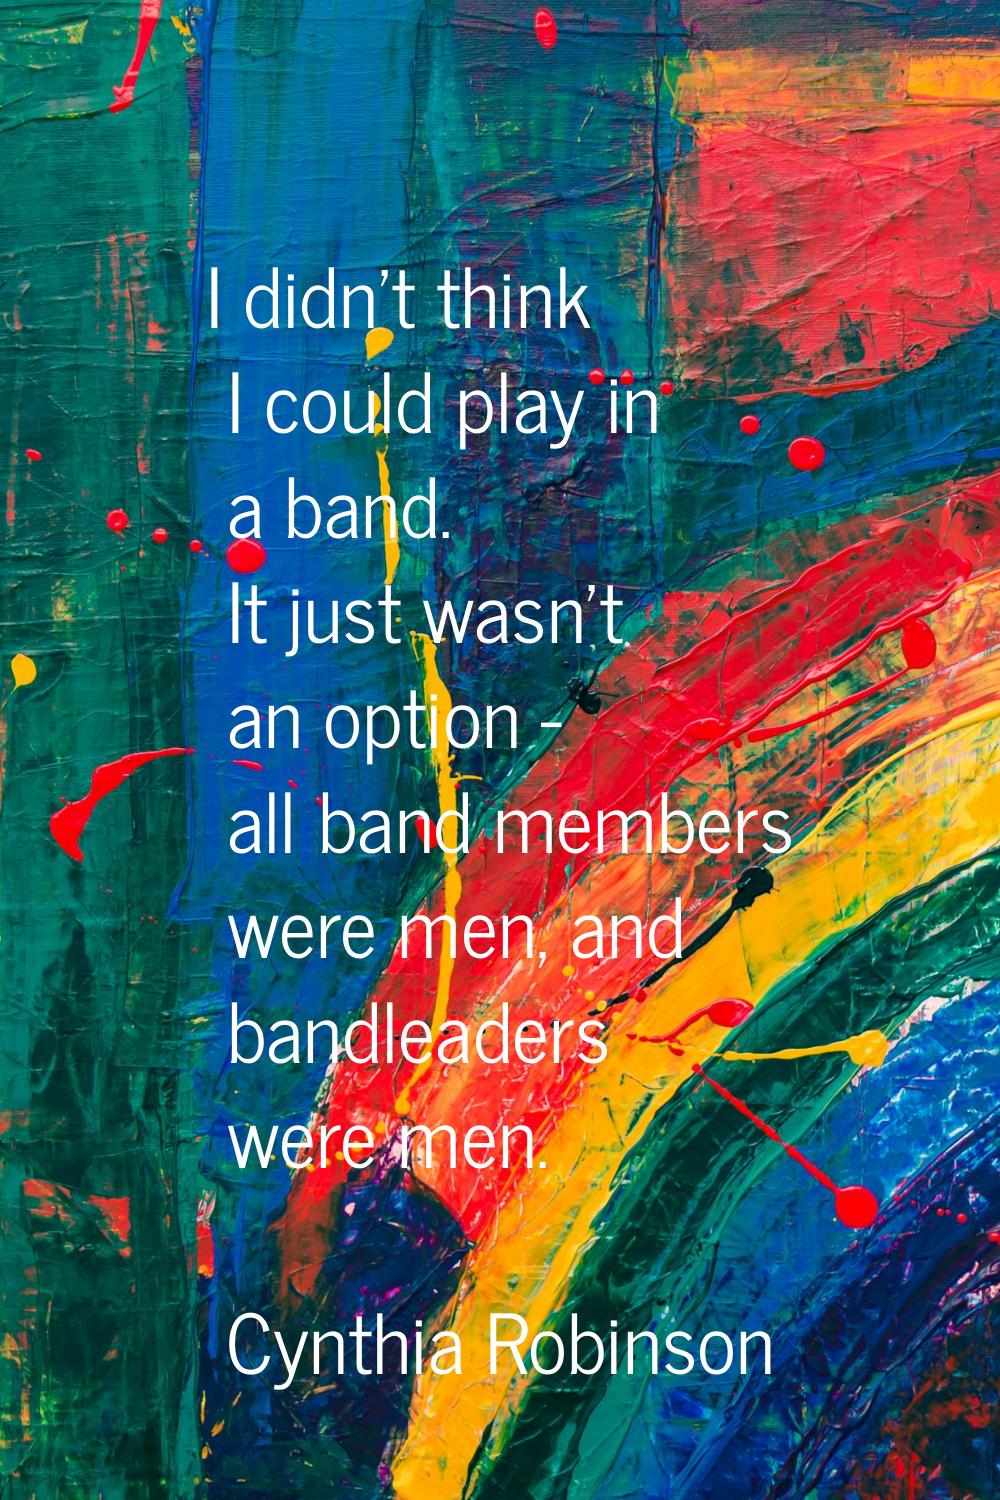 I didn't think I could play in a band. It just wasn't an option - all band members were men, and ba